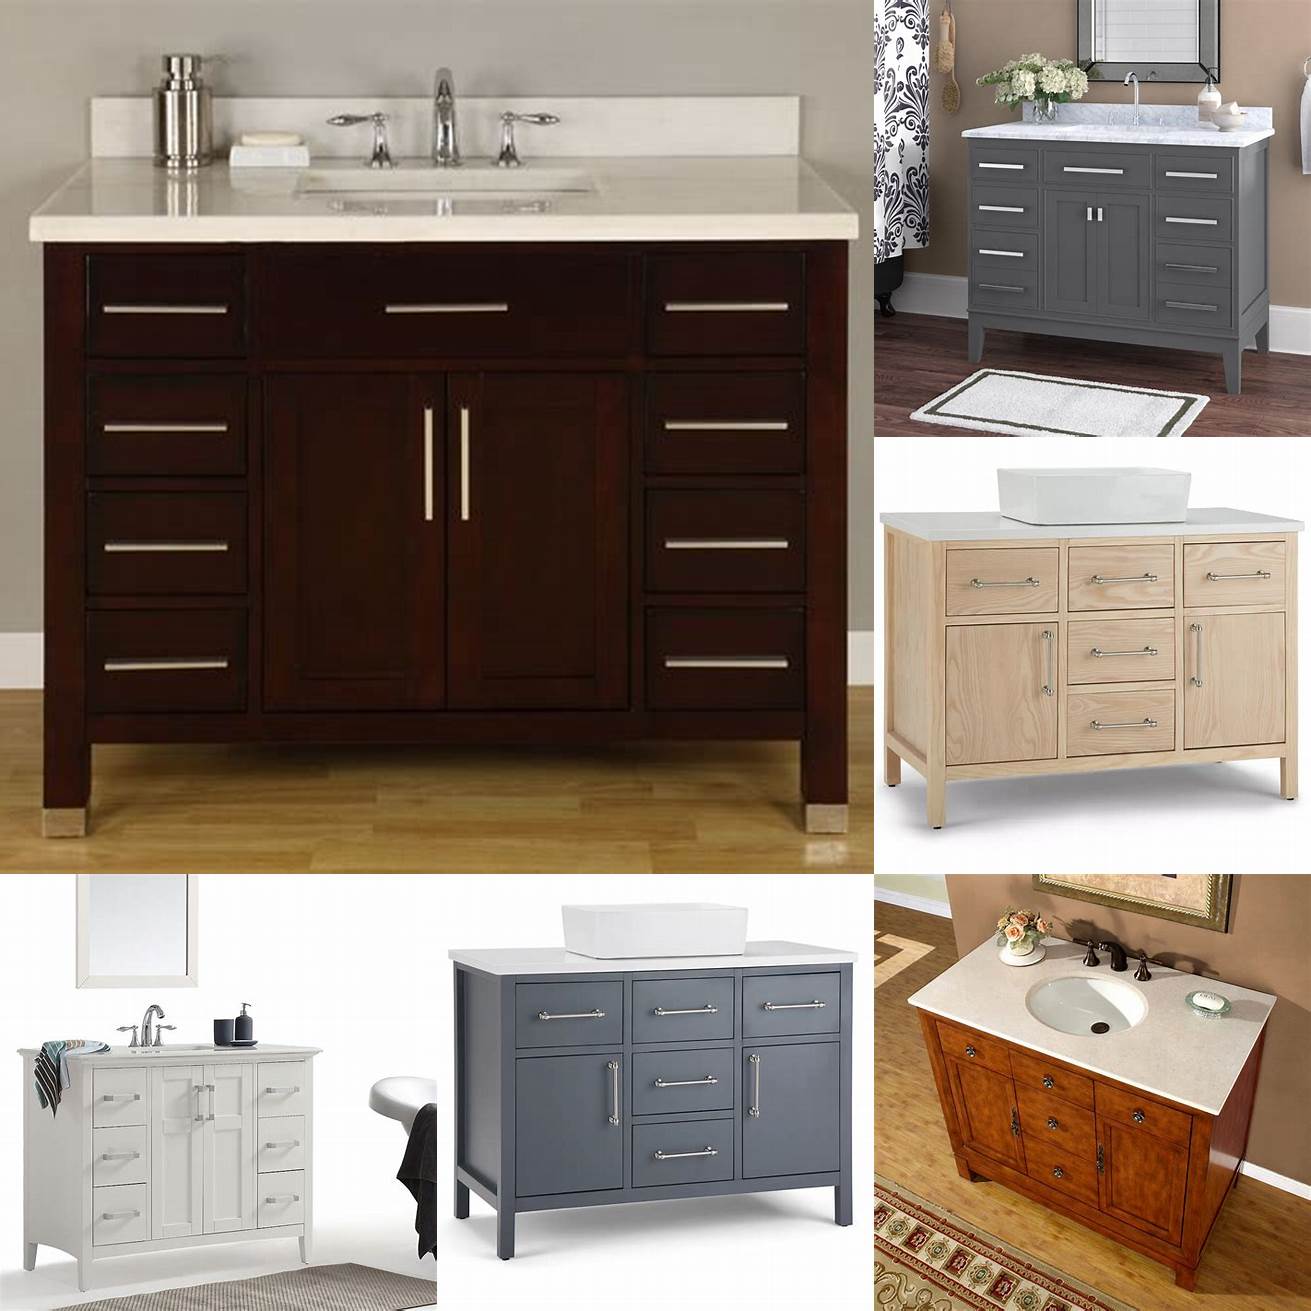 Modern-style 42-inch bathroom vanity with glass countertop